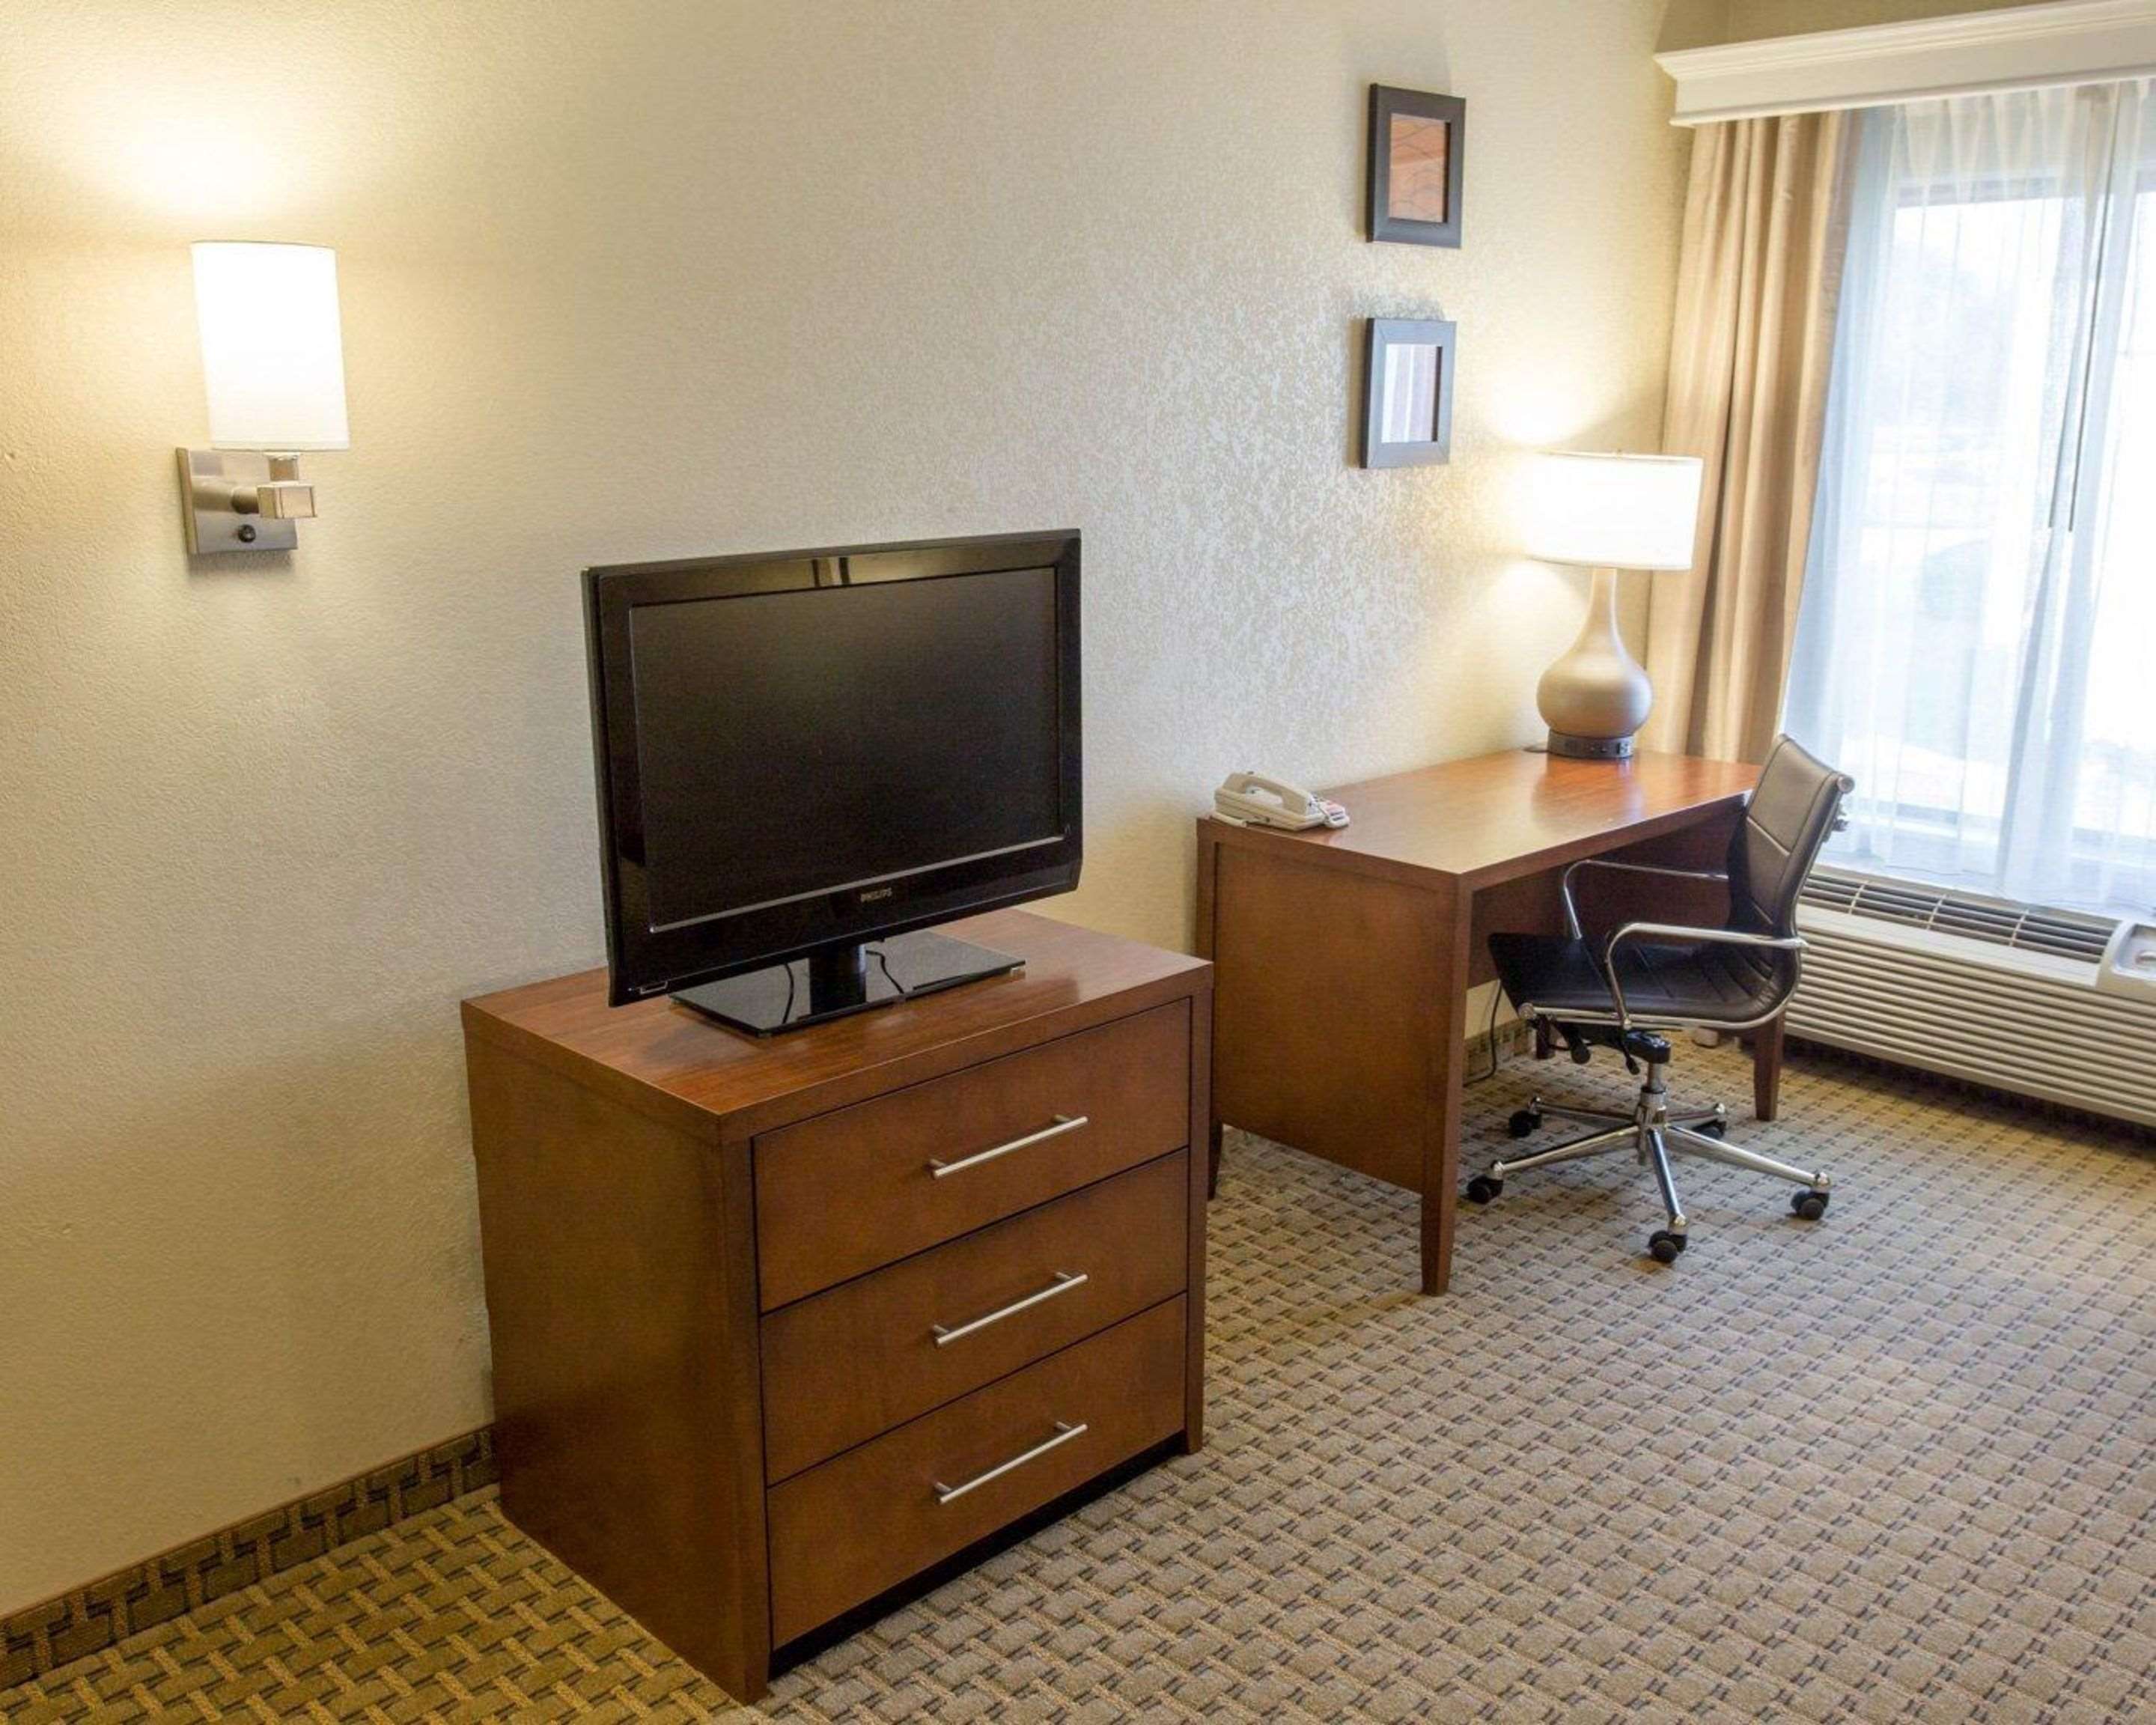 King room with 32-inch LCD television